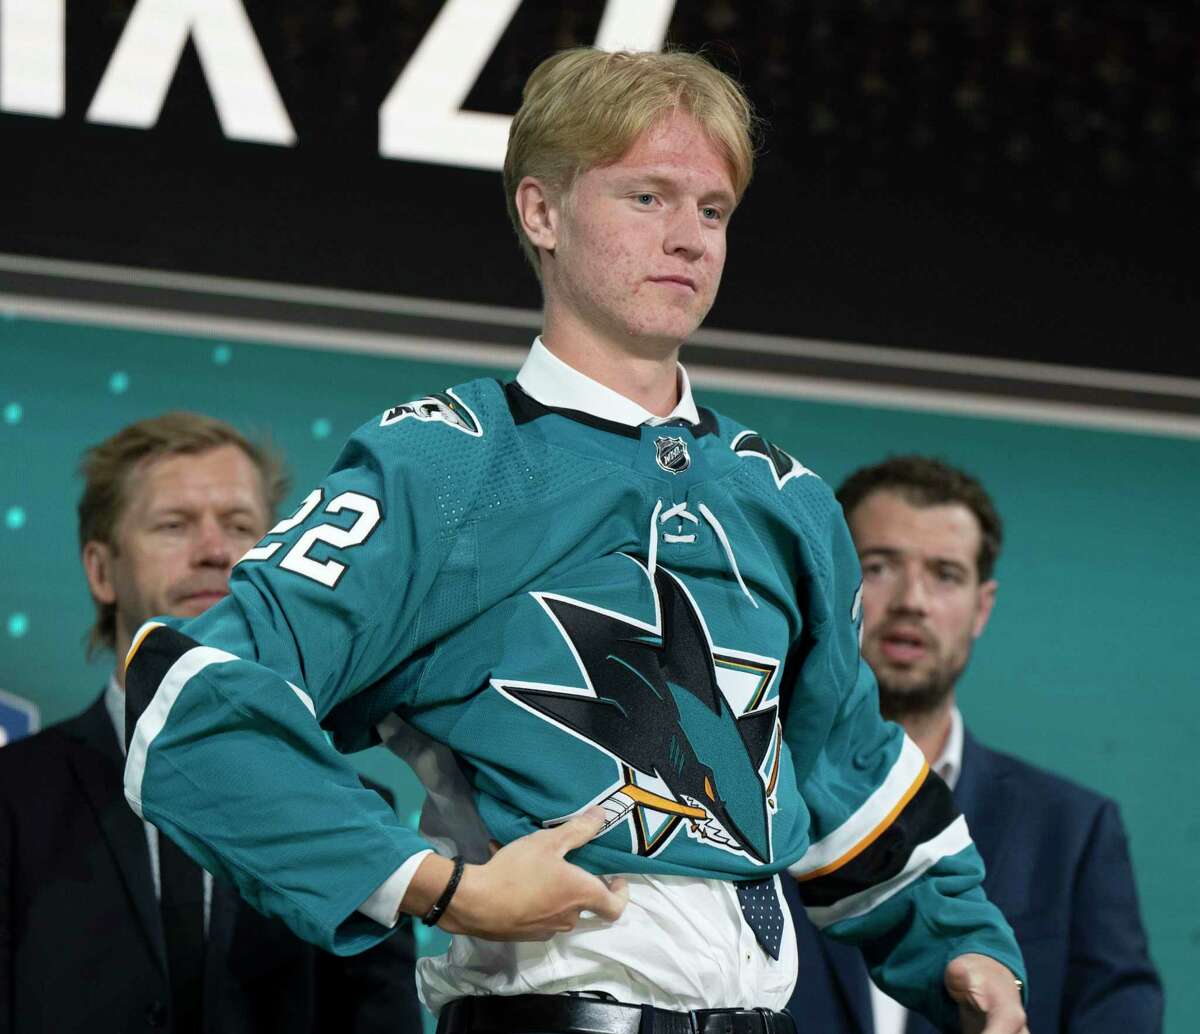 Filip Bystedt puts on a San Jose Sharks jersey after being chosen during the first round of the NHL hockey draft in Montreal on Thursday, July 7, 2022. (Ryan Remiorz/The Canadian Press via AP)